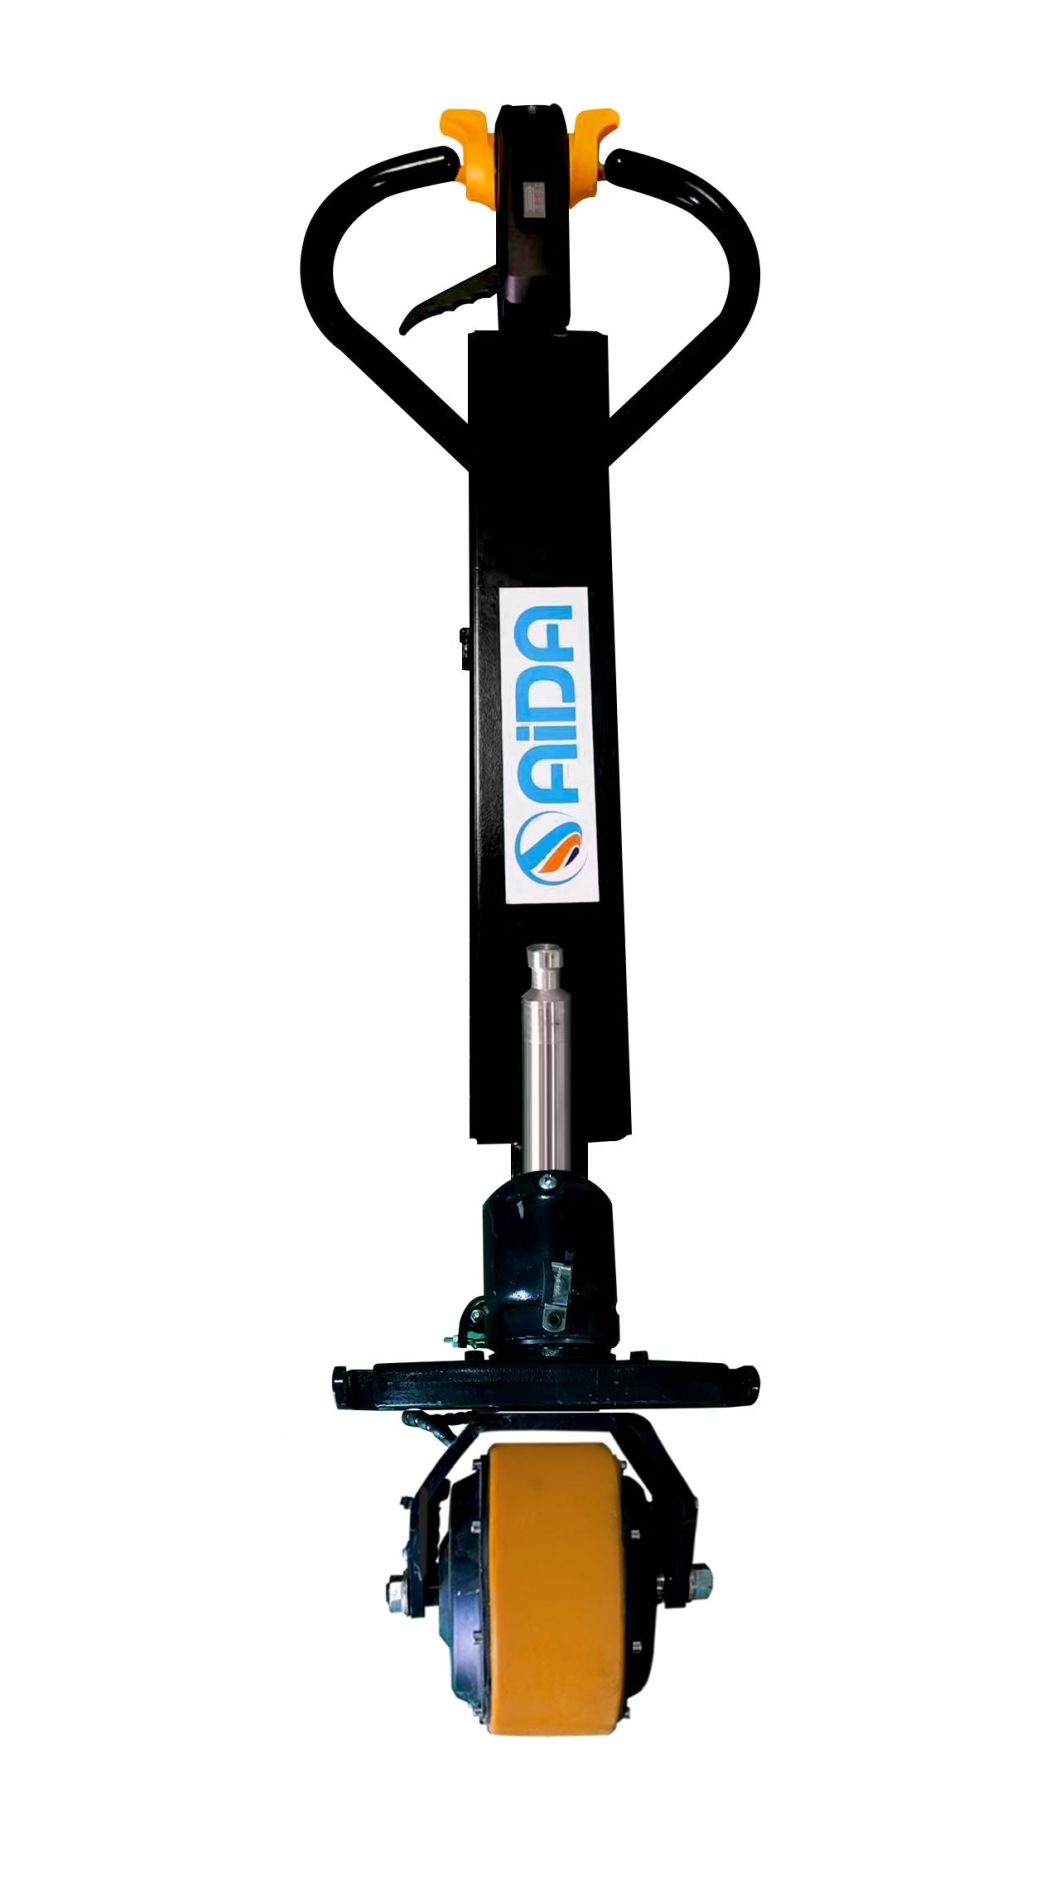 Upgrade Your Hand Pallet Truck to Electric Power with The Self-Propelled Electric Power Handle Kit for Quick Modification